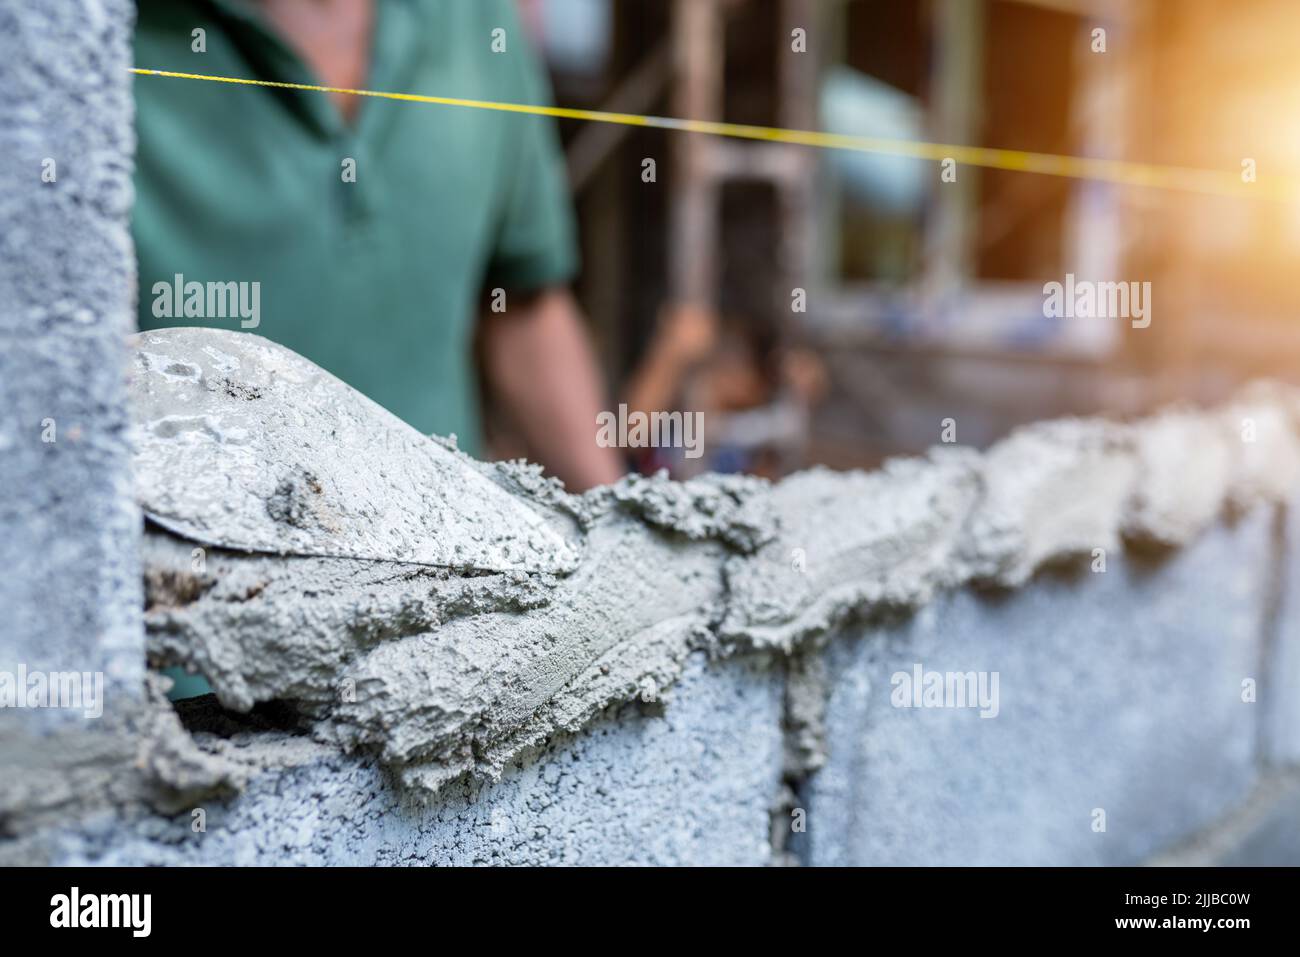 Workers use trowels to construct walls or walls with bricks and mortar. Stock Photo